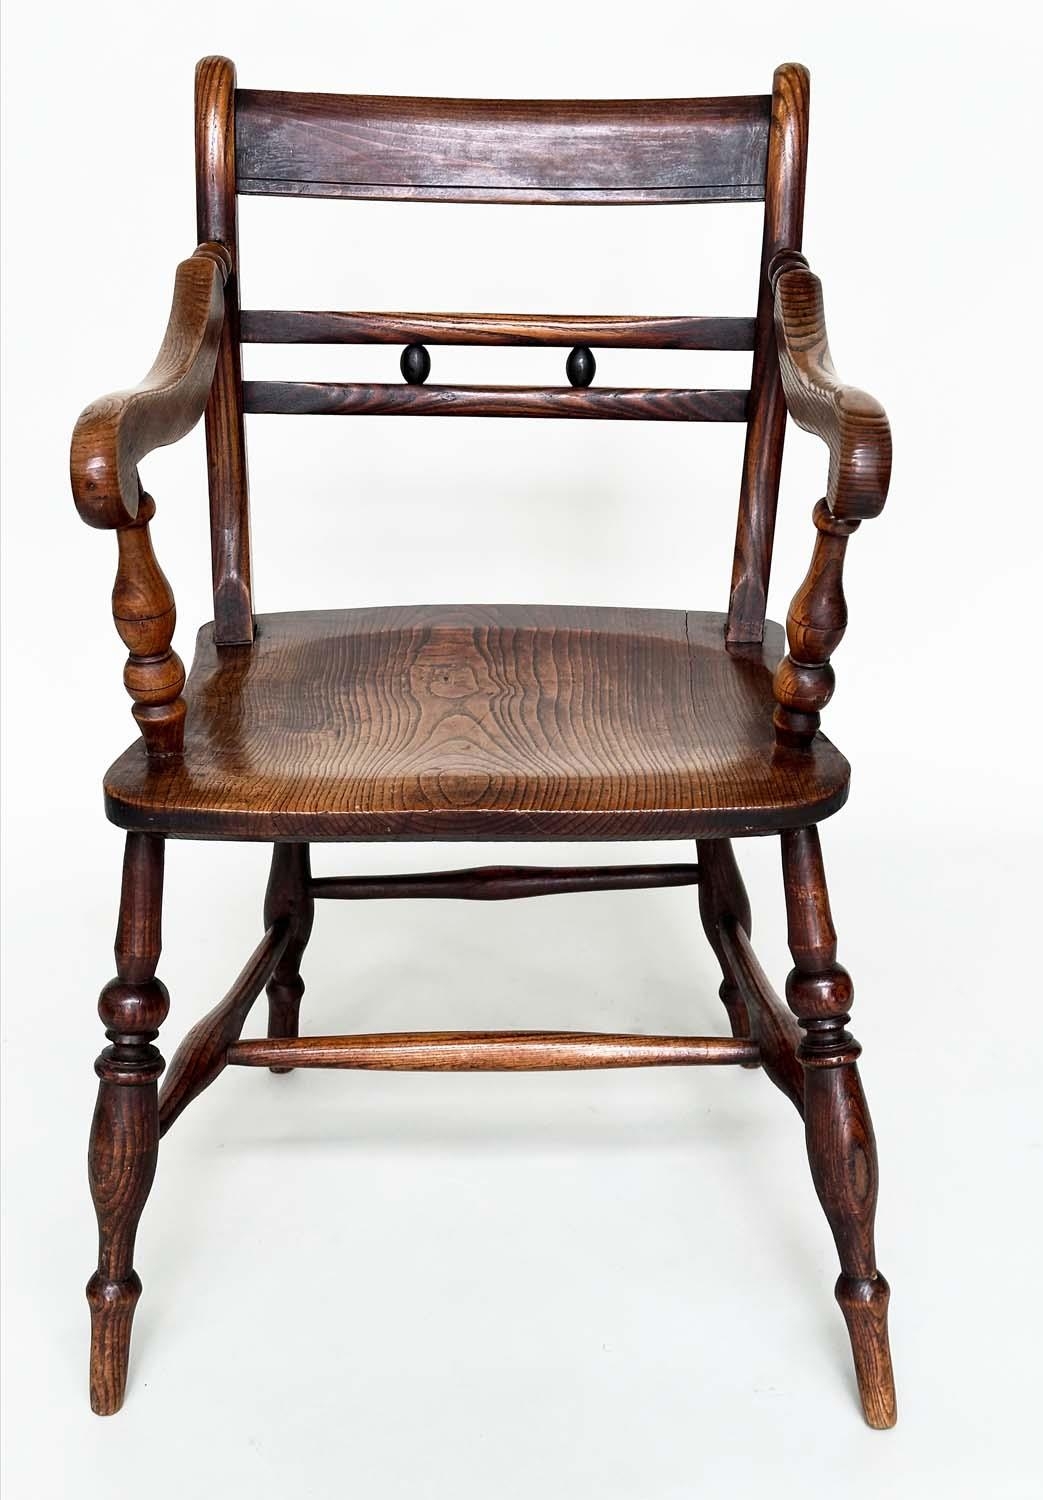 OXFORD ARMCHAIRS, a pair, 19th century English, High Wycombe, ash, elm and alder with shaped seats - Image 11 of 11